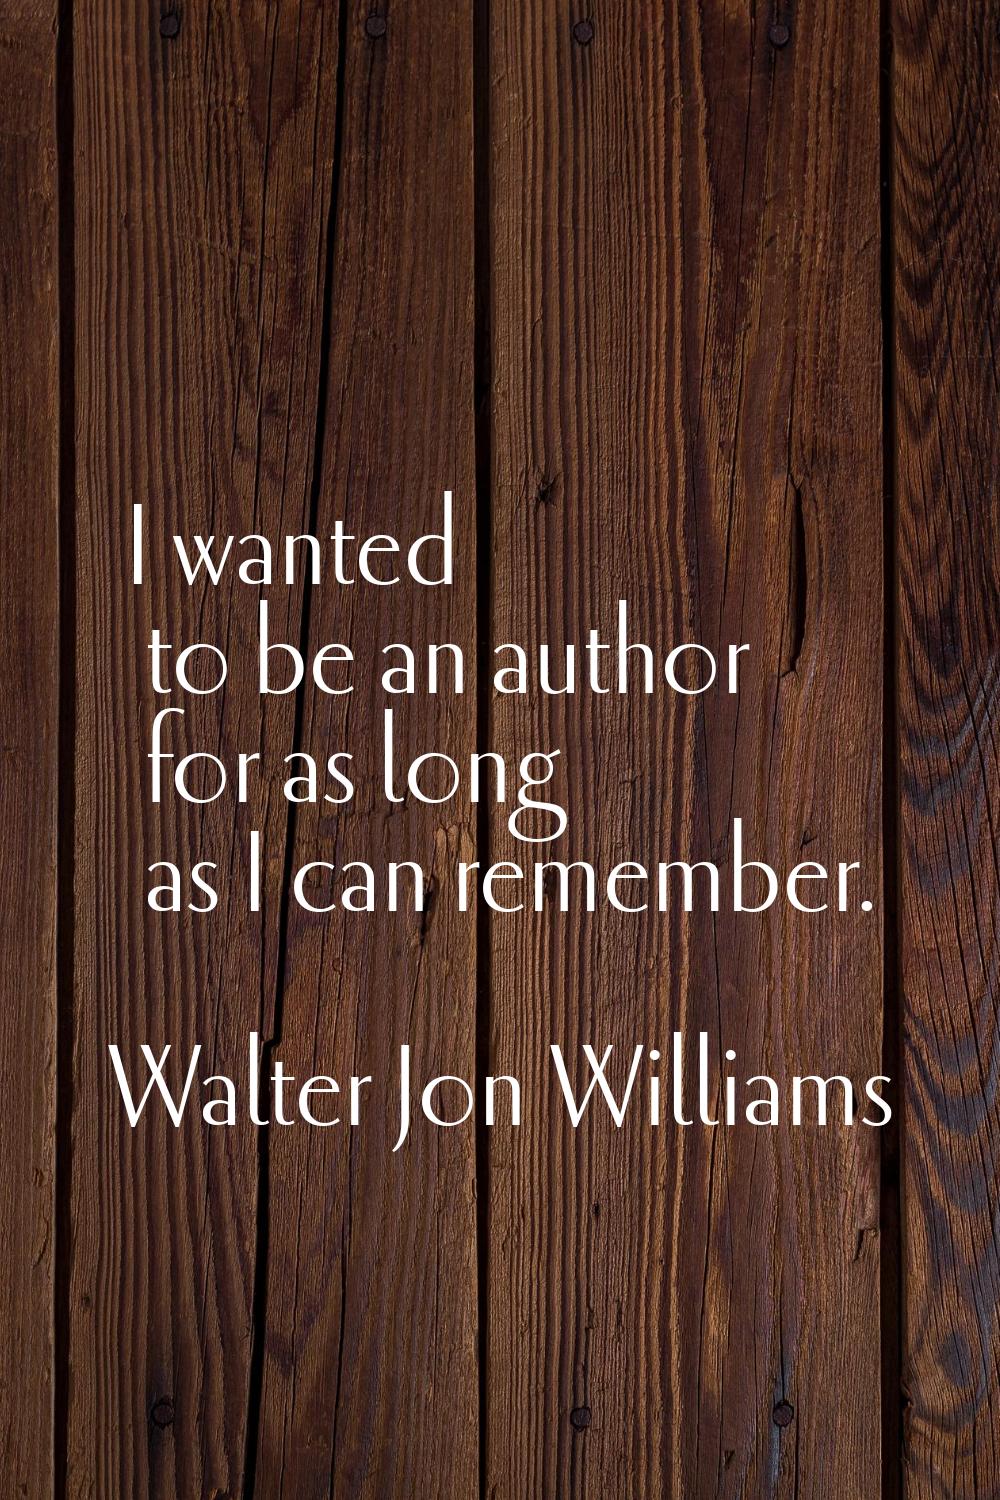 I wanted to be an author for as long as I can remember.